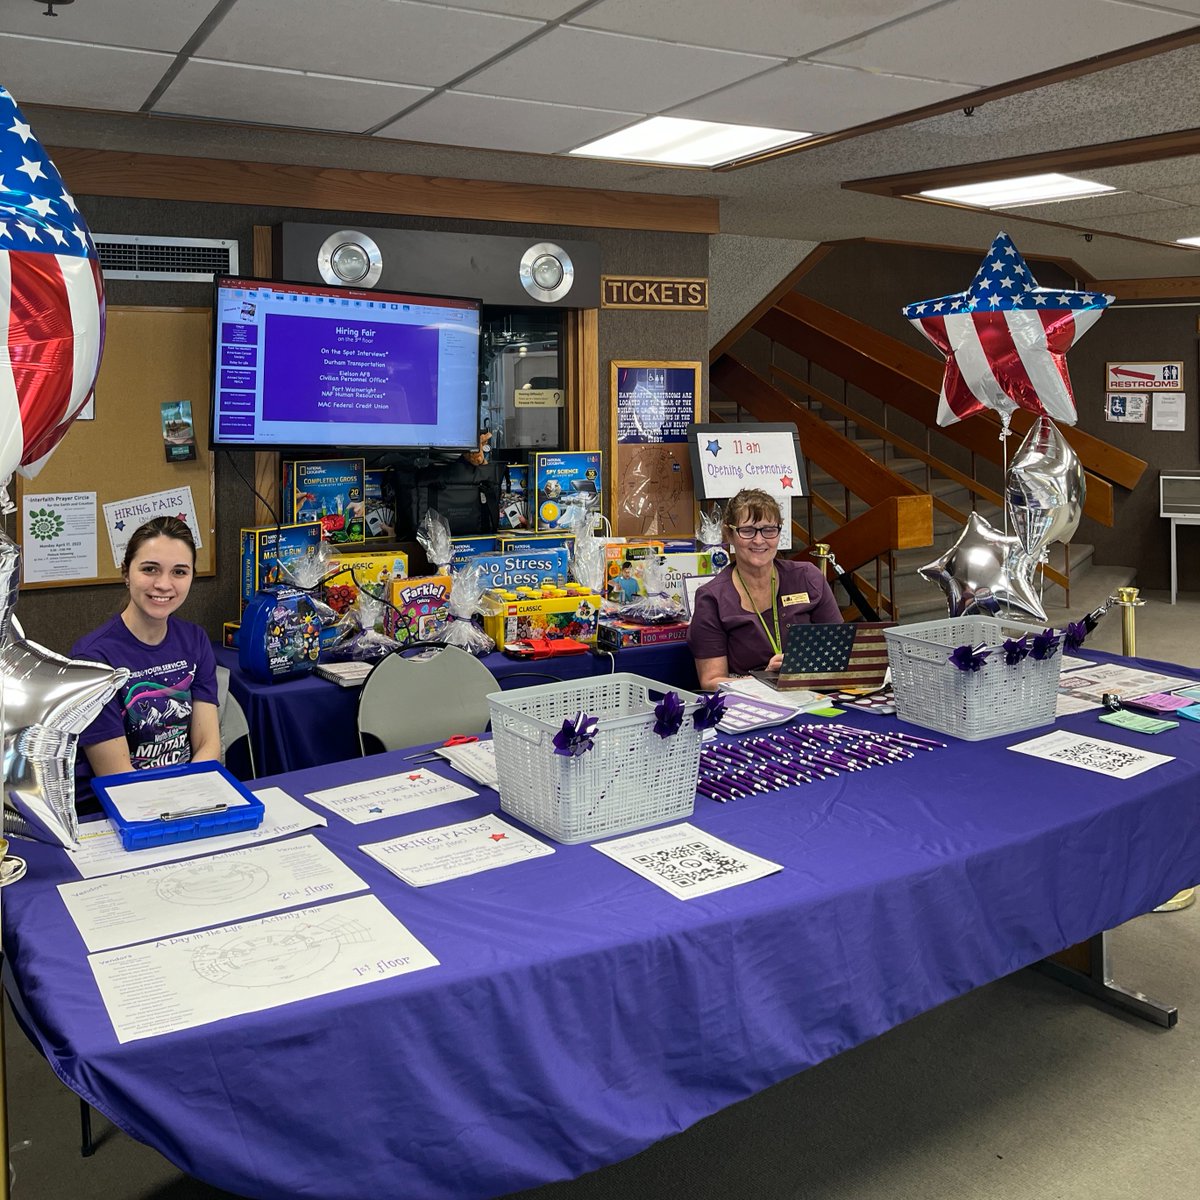 Fairbanks is purple for #MightyMilitaryKids! Our Outreach Manager, Shannon Geese, went purple for the #MonthoftheMilitaryChild event at Pioneer Park's Centennial Center this weekend. We love that so many kids stopped by for a picture in our photo frame. More photos to come!